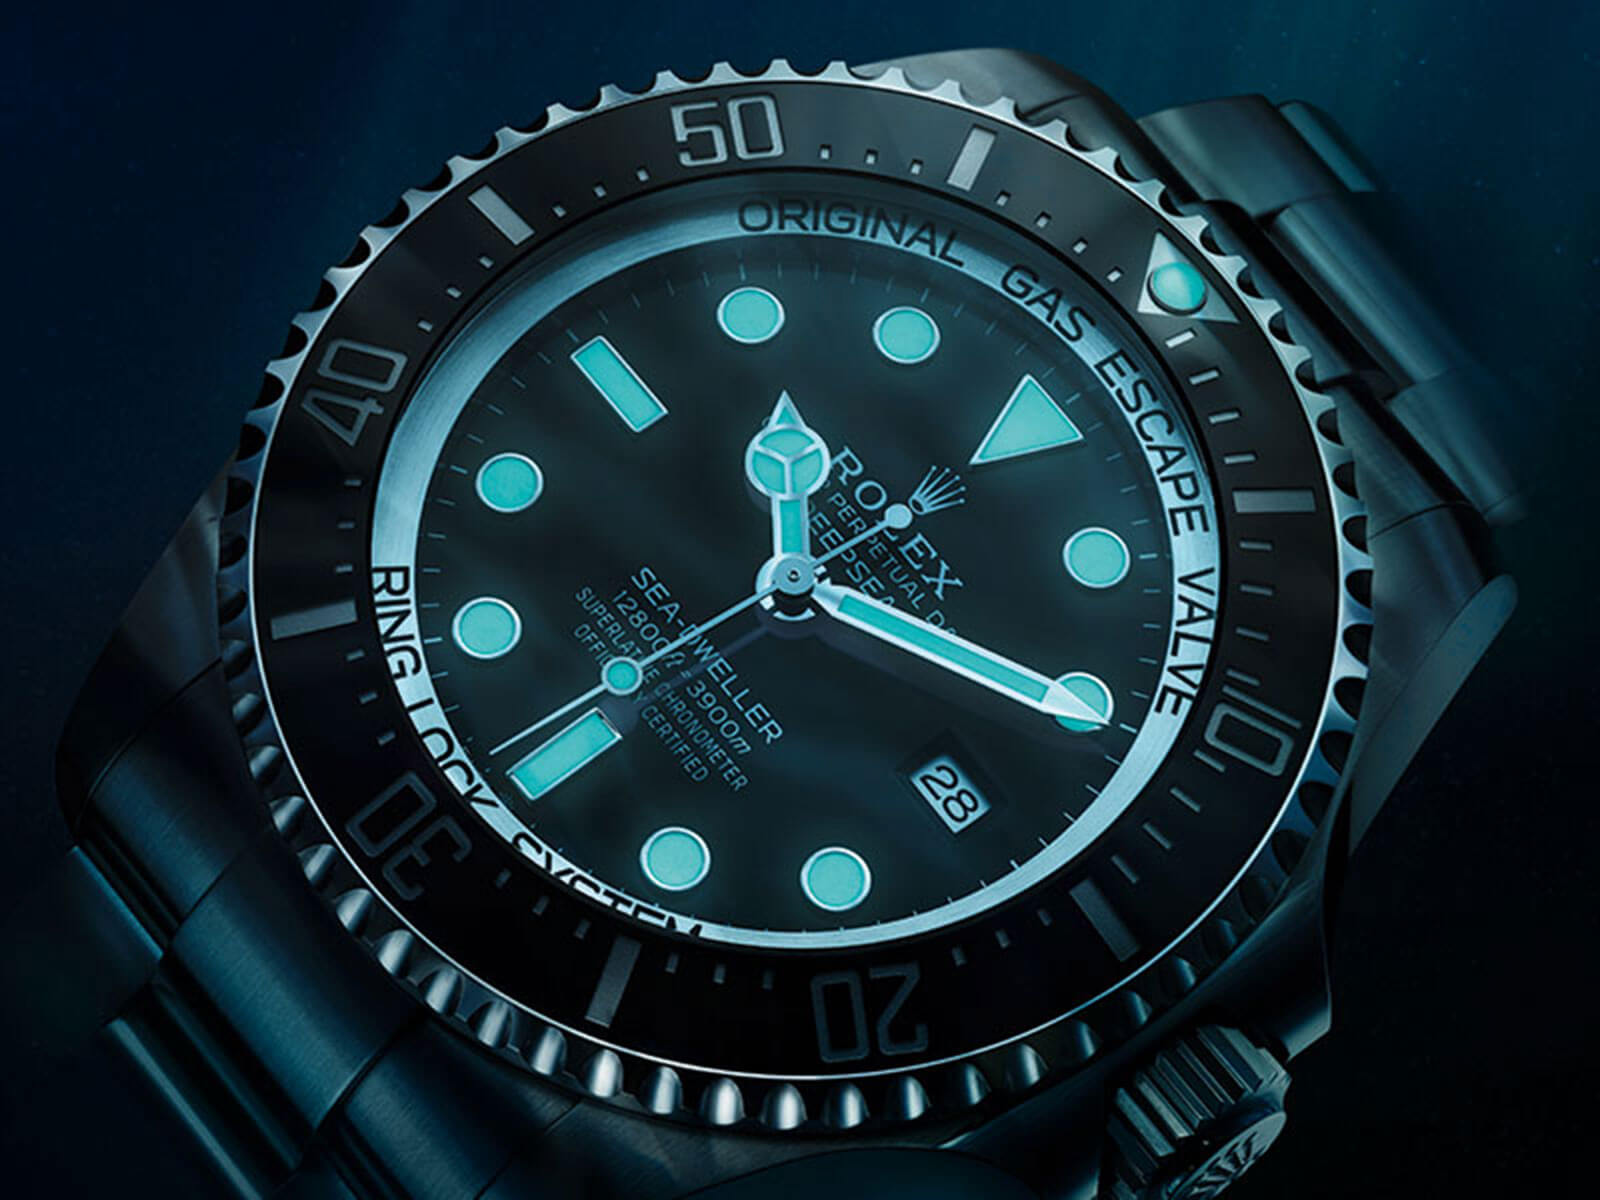 Rolex Deepsea Sea-Dweller 116660 was the first Rolex model with the Chromalight Display